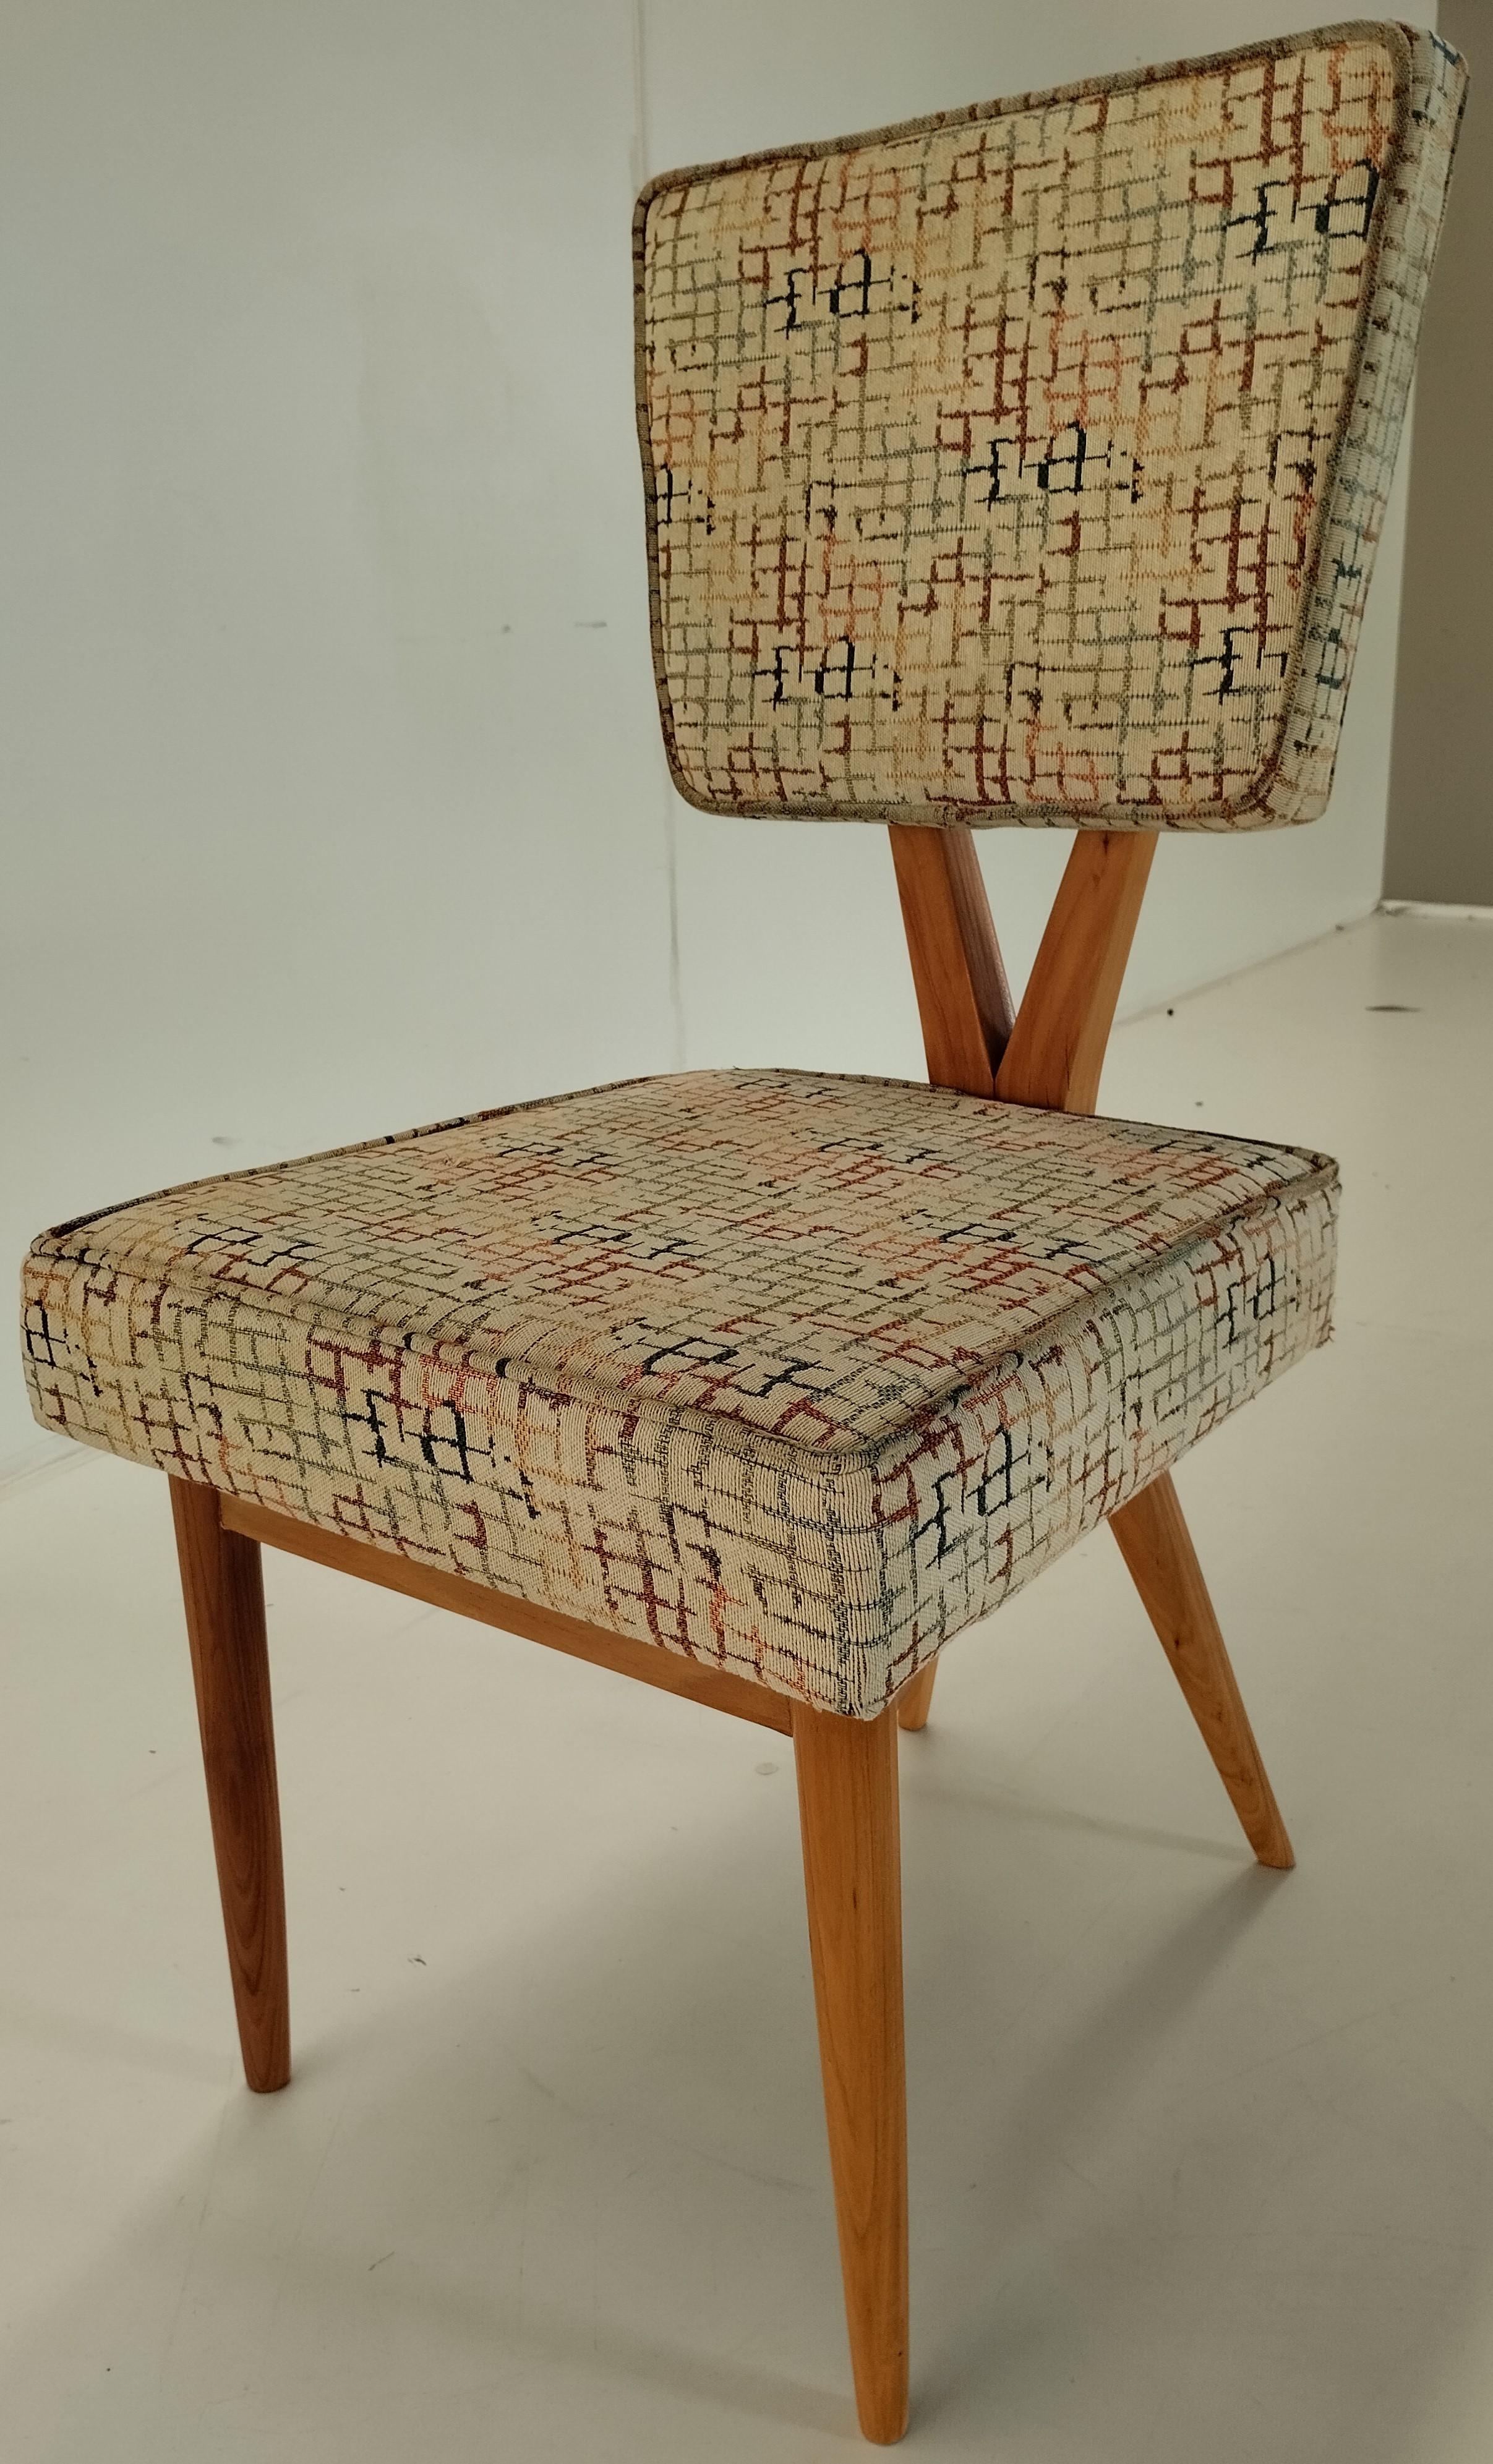 This beautiful and very rare chair is attributed to José Zanine Caldas and his company Móveis Artisticos Z. Structure in solid noble wood, totally original, only cleaned and refinished. X-shaped backrest. Backrest and seat in tacheado fabric